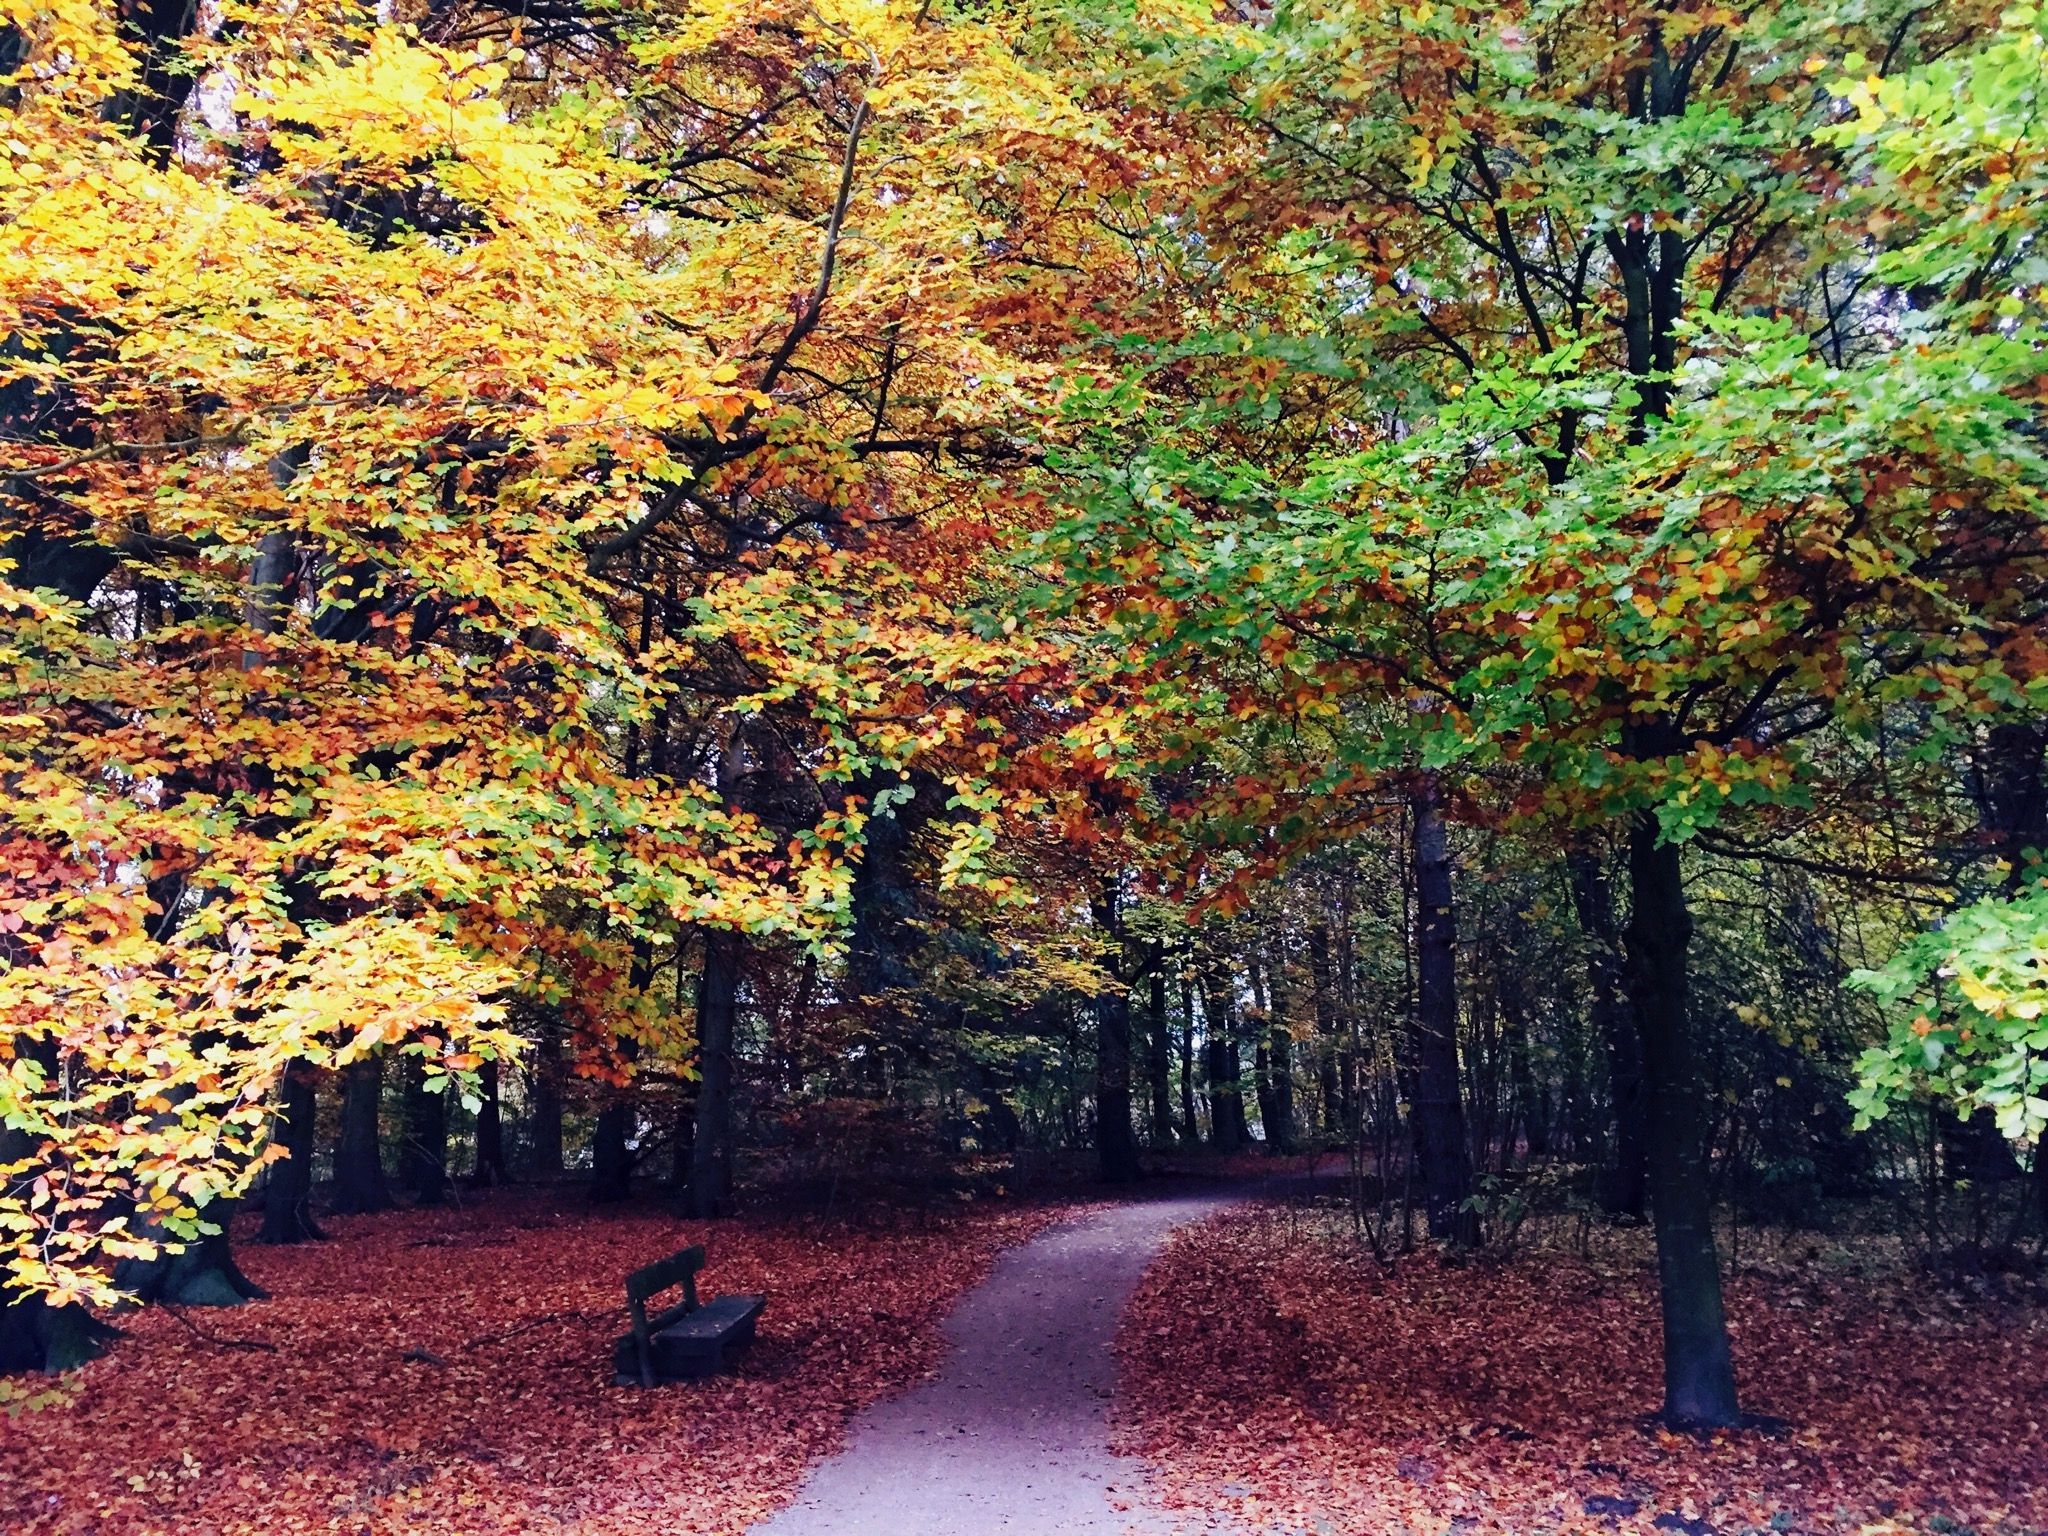 Best Sites for Autumn Leaves in Germany